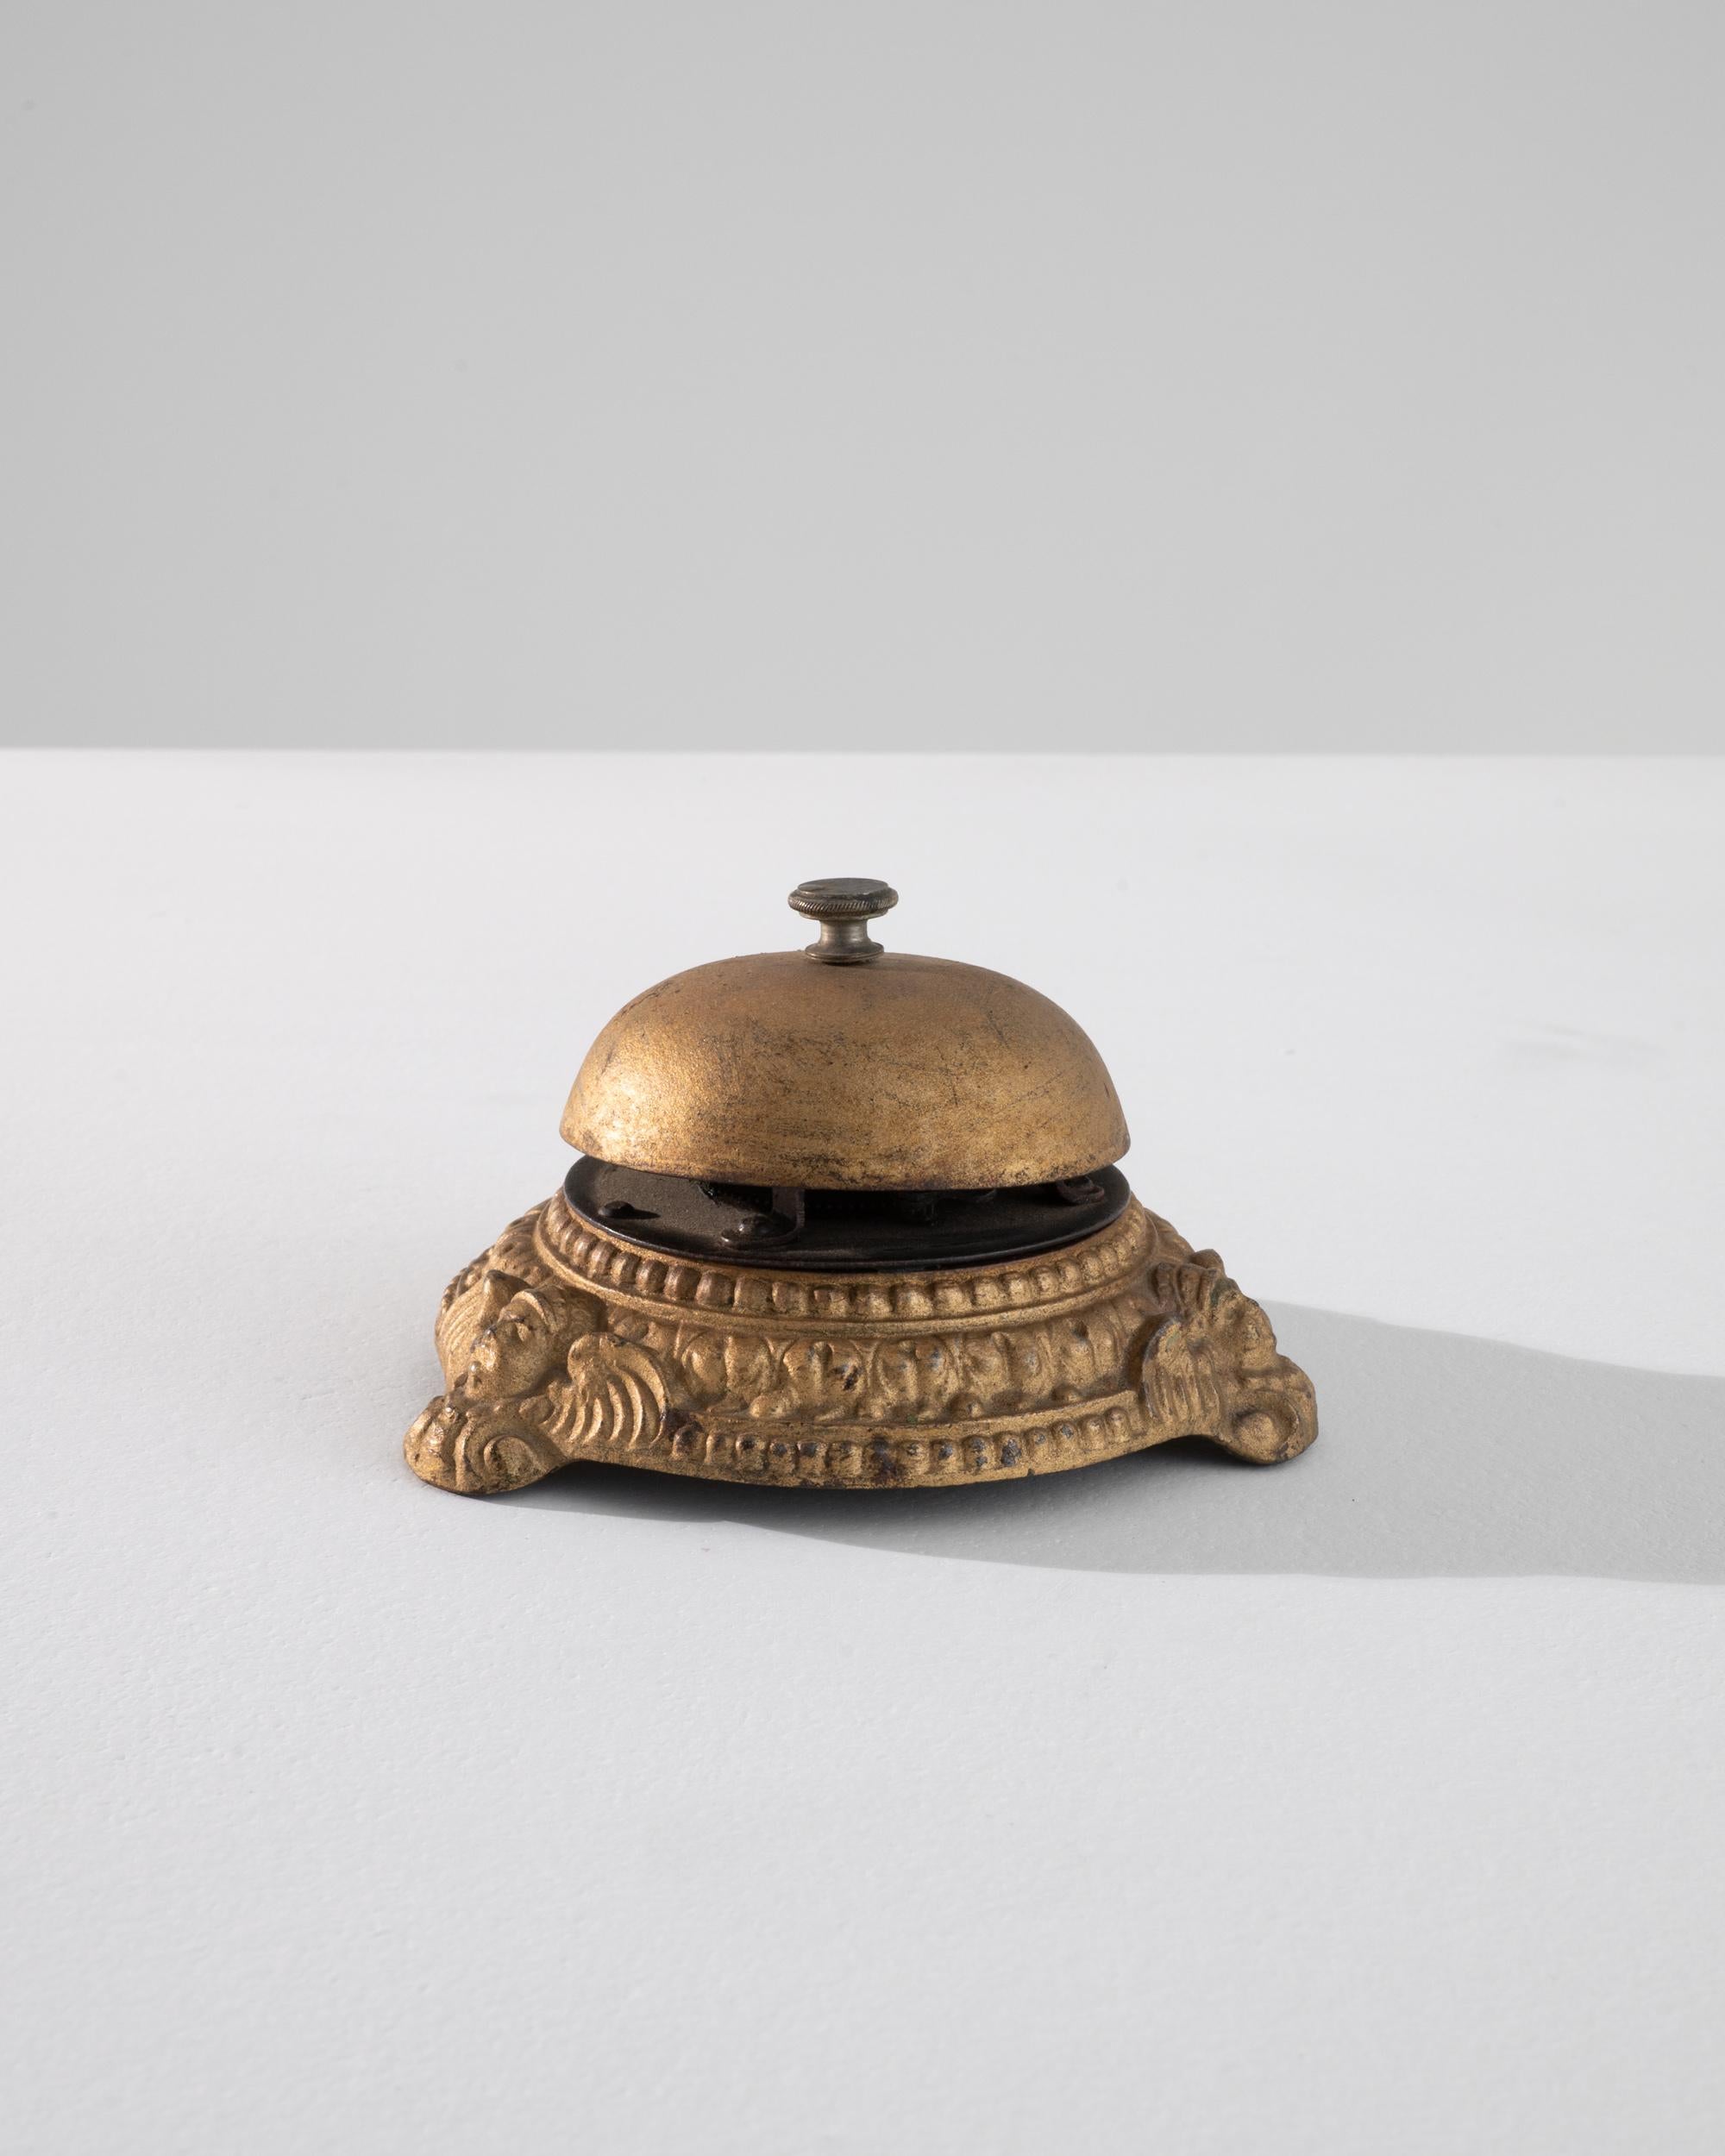 A brass bell created in 1900s France. Small, but immediately noticeable, this brass call bell makes a loud impression even when silent. An impressively detailed, cast pattern runs its circumference, punctuated by angelic faces wreathed in feathers.